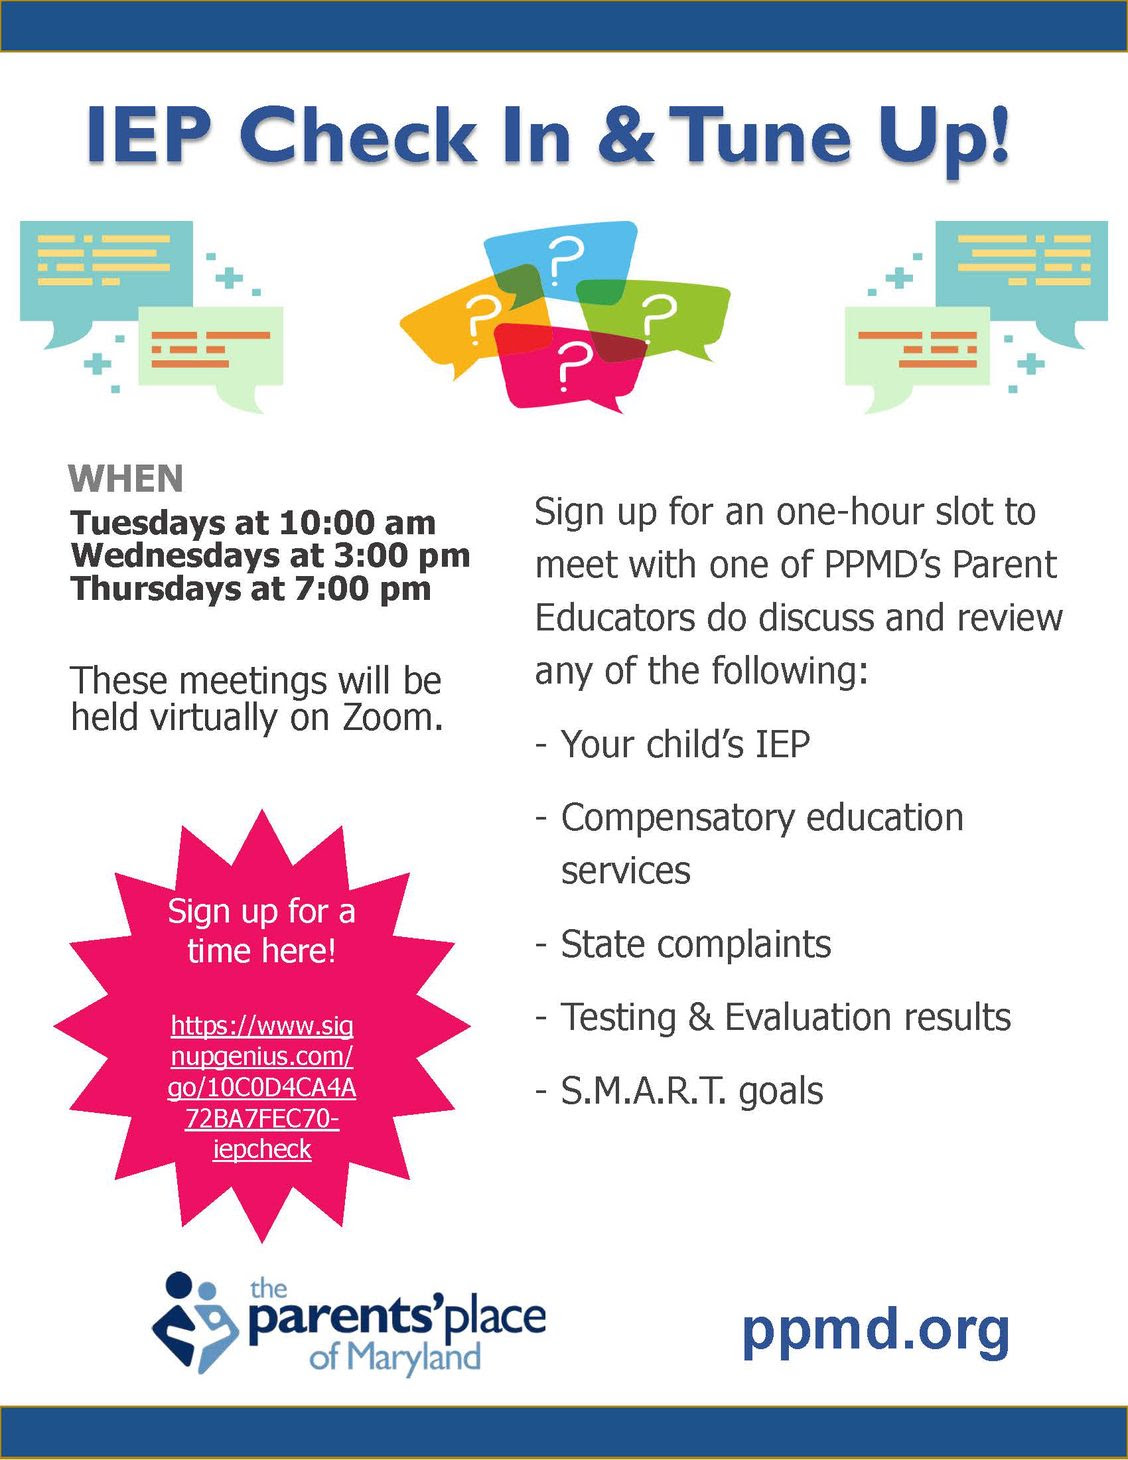 IEP Check in and Tune Up! When: Tuesdays at 10am, Wednesdays at 3pm, Thursdays at 7pm. These meetings will be held virtually on Zoom. Sign up for an one-hour slot to meet with one of PPMD's parent educators to discuss and review any of the following: your child's IEP, compensatory education services, state complaints, testing and evaluation results, S.M.A.R.T. goals